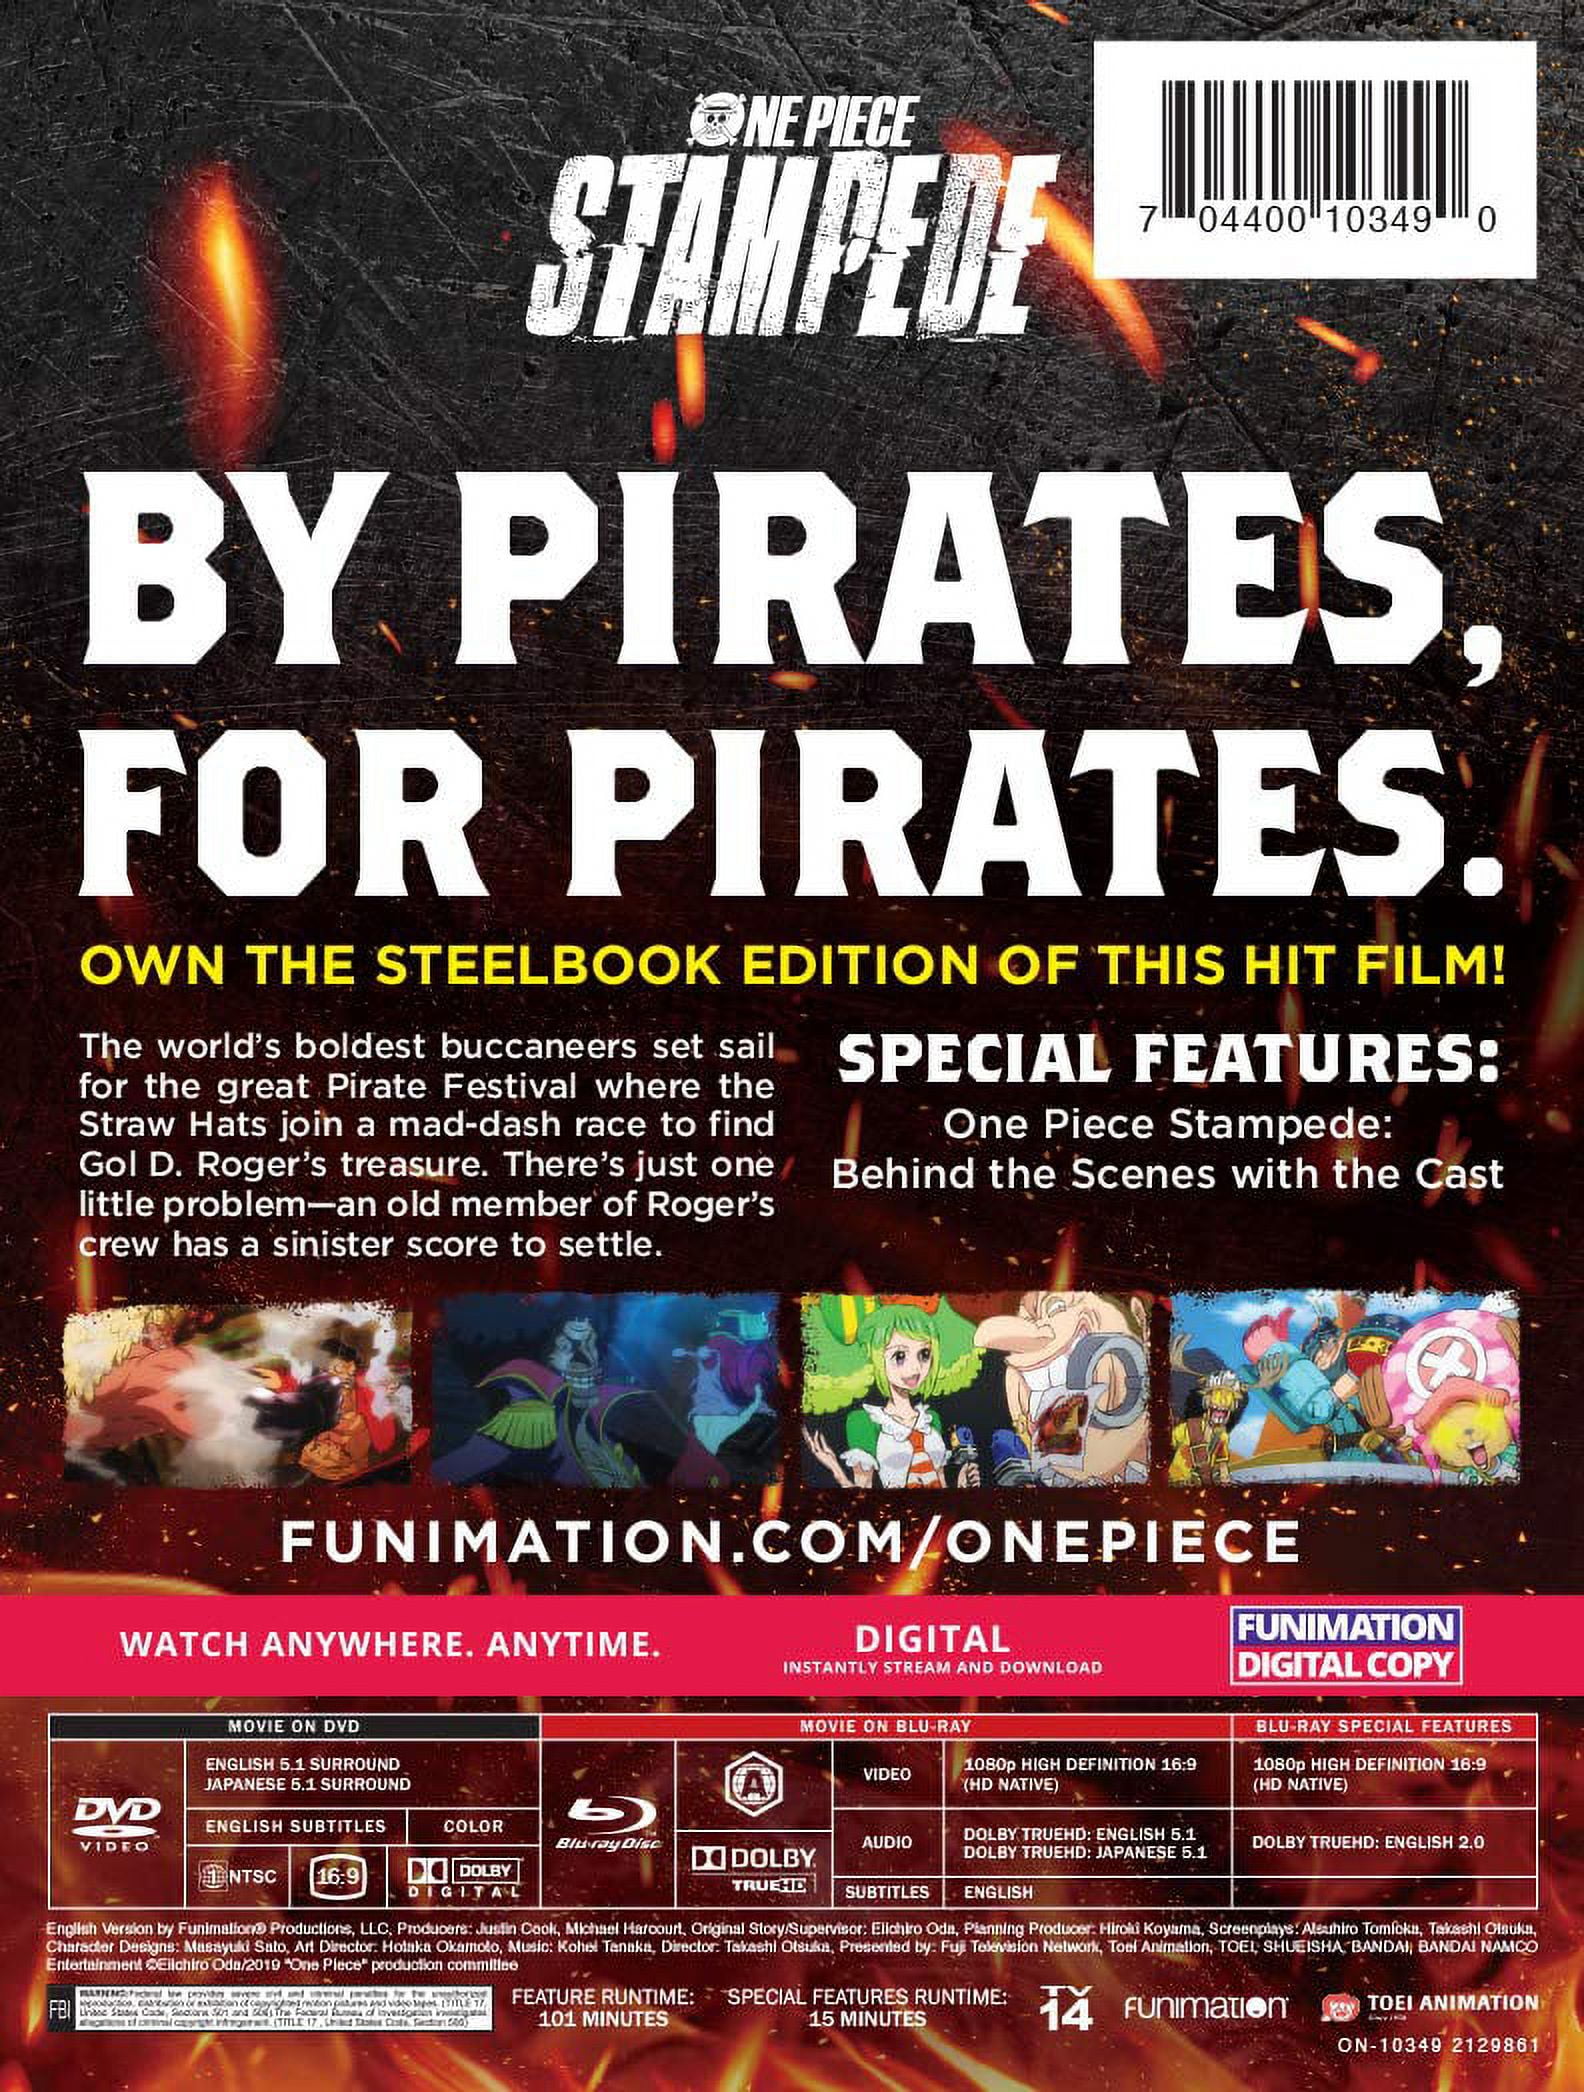 One Piece Stampede Posters for Sale